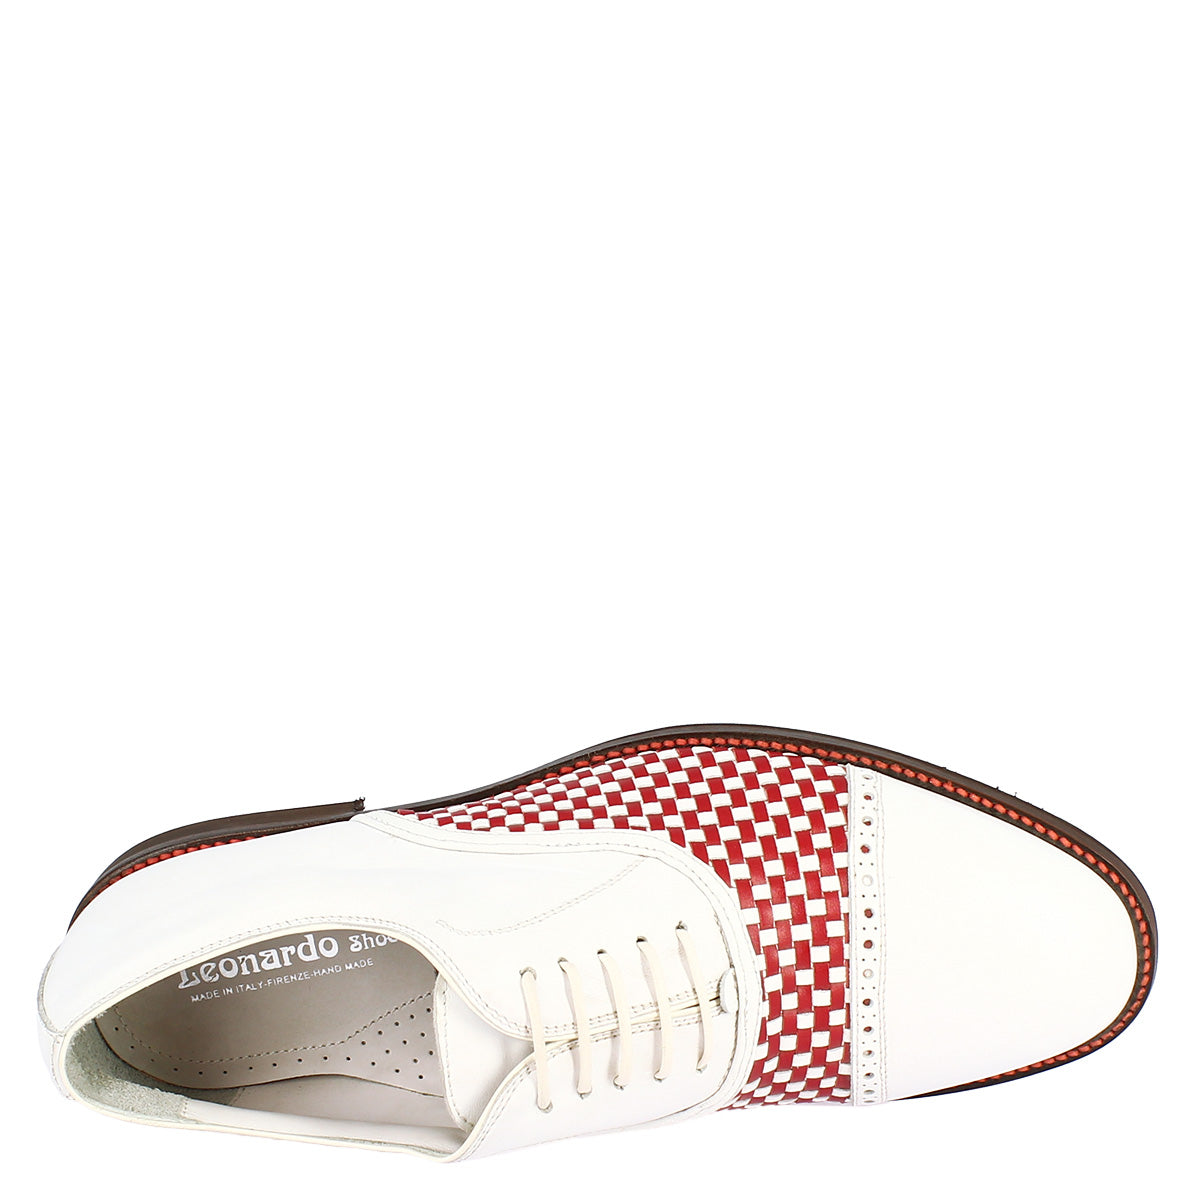 Classic handmade men's golf shoes in white red calf leather